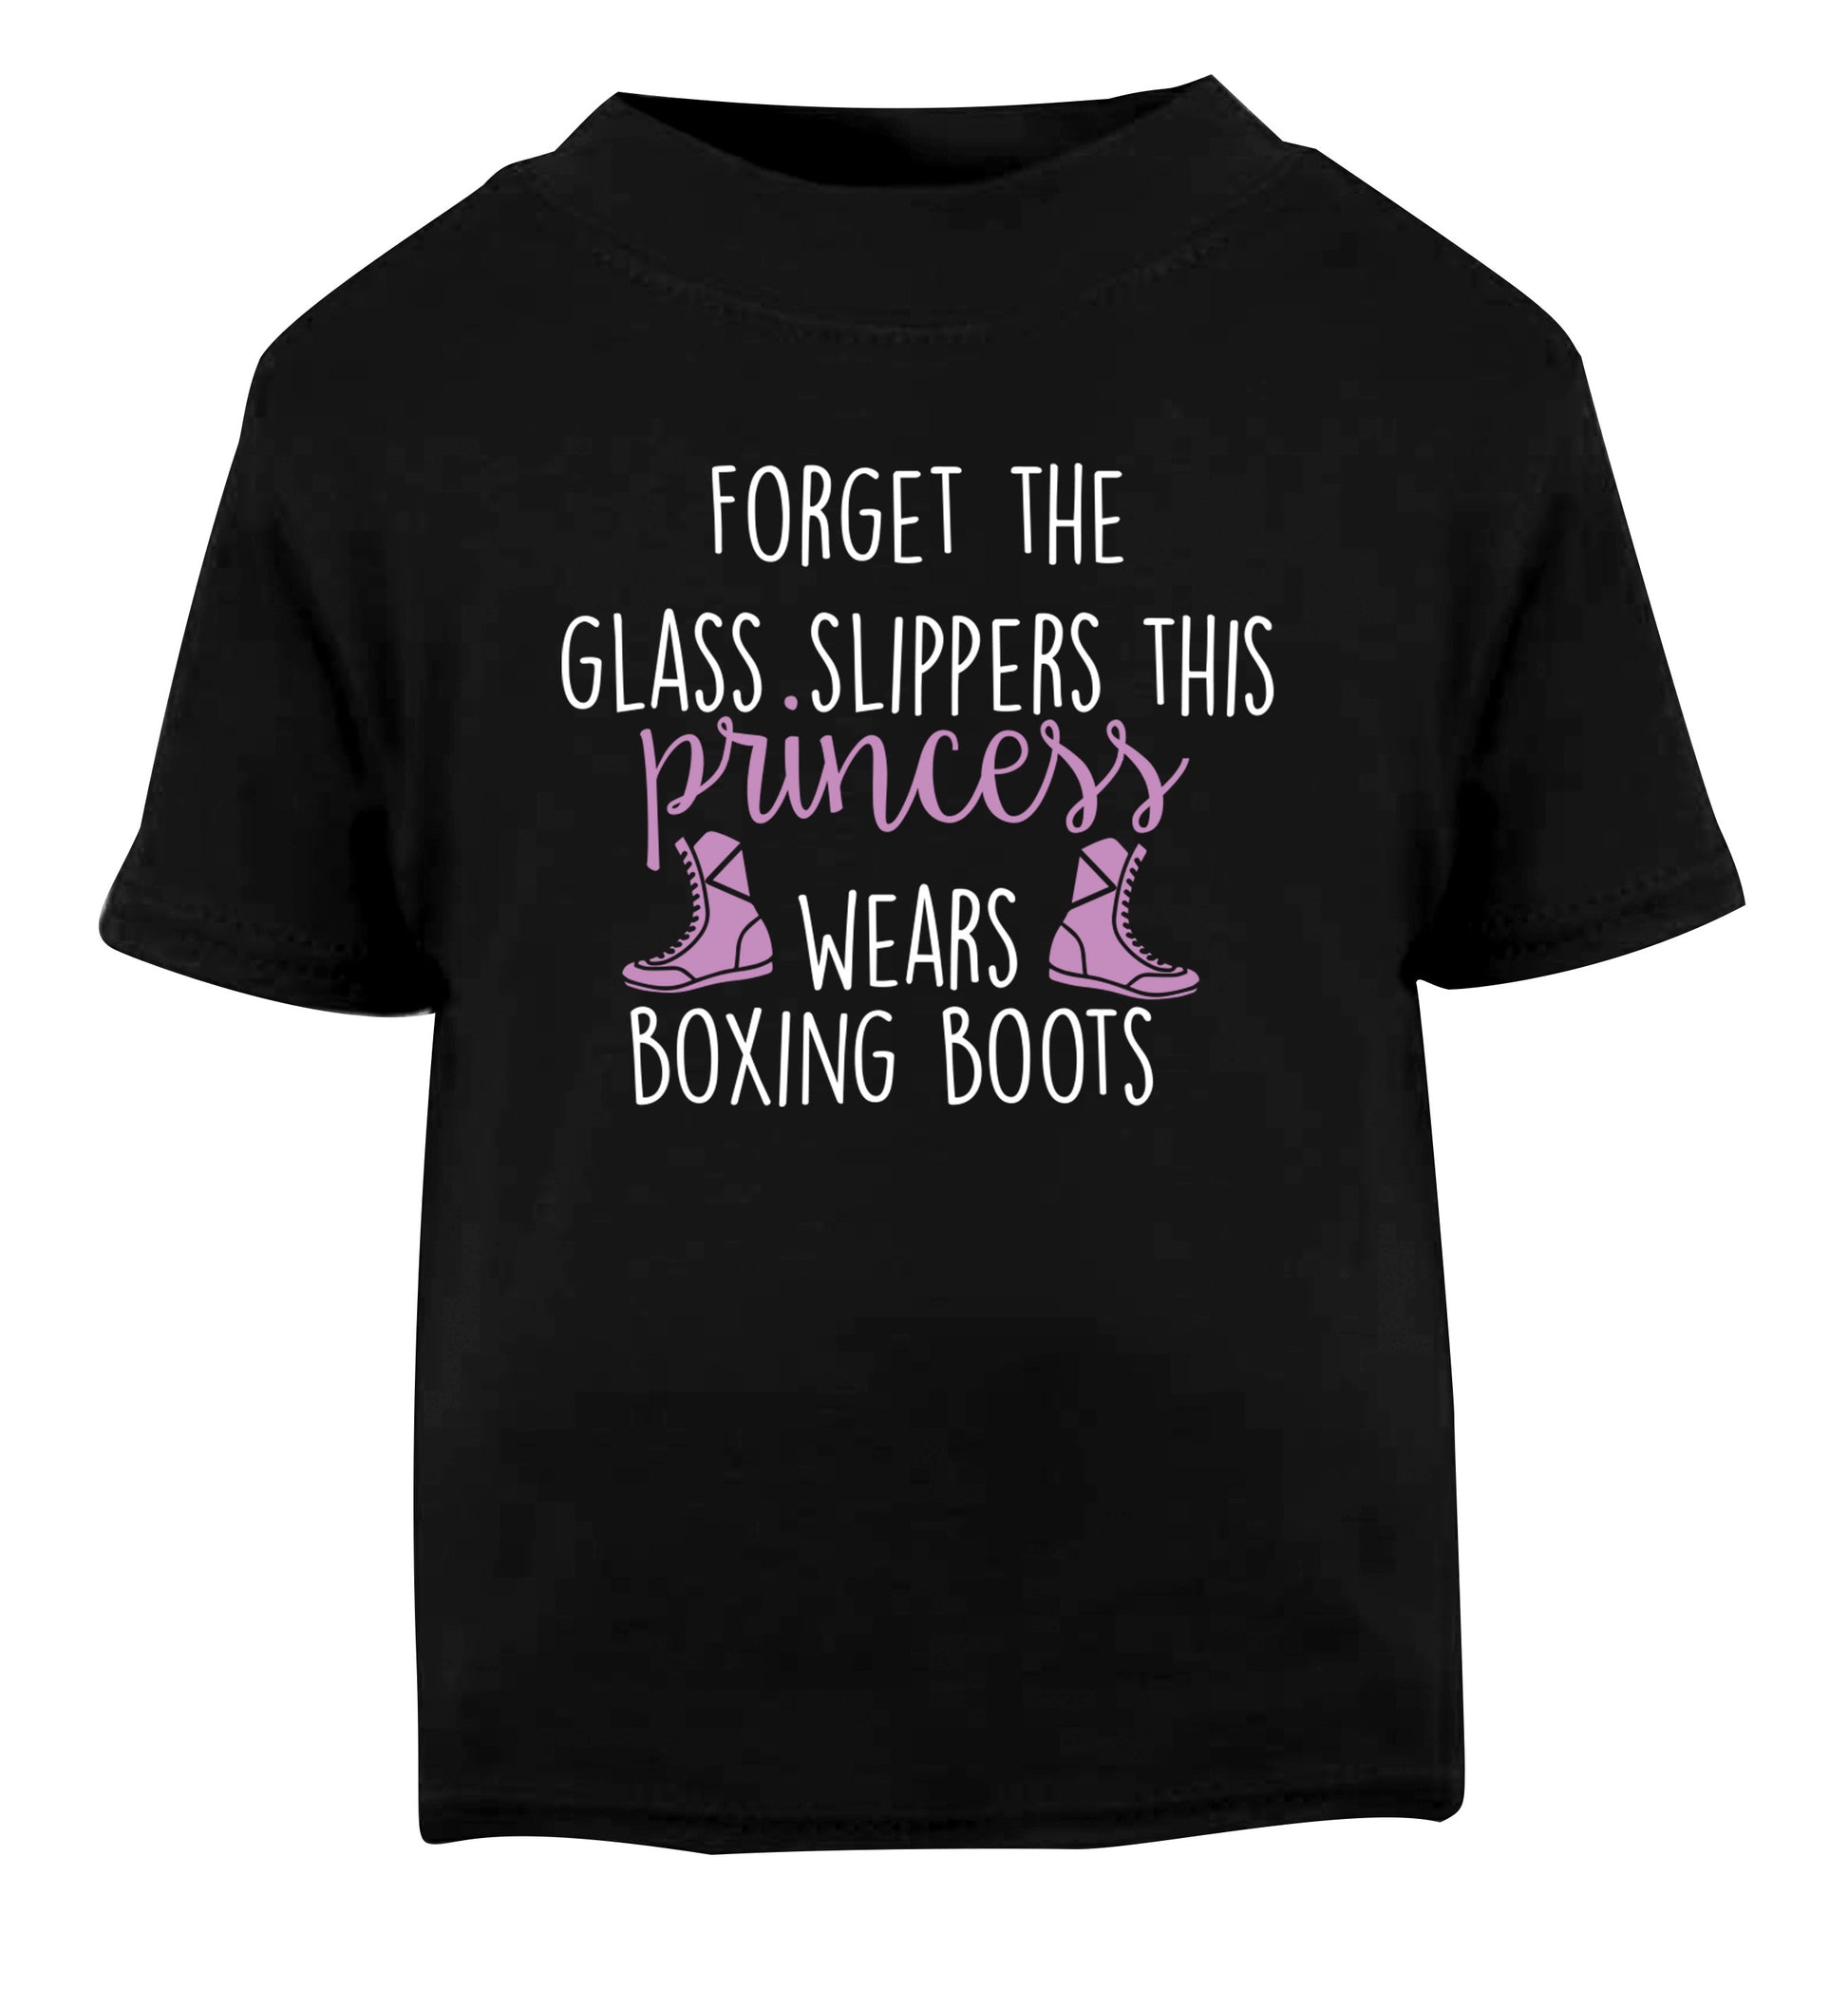 Forget the glass slippers this princess wears boxing boots Black Baby Toddler Tshirt 2 years